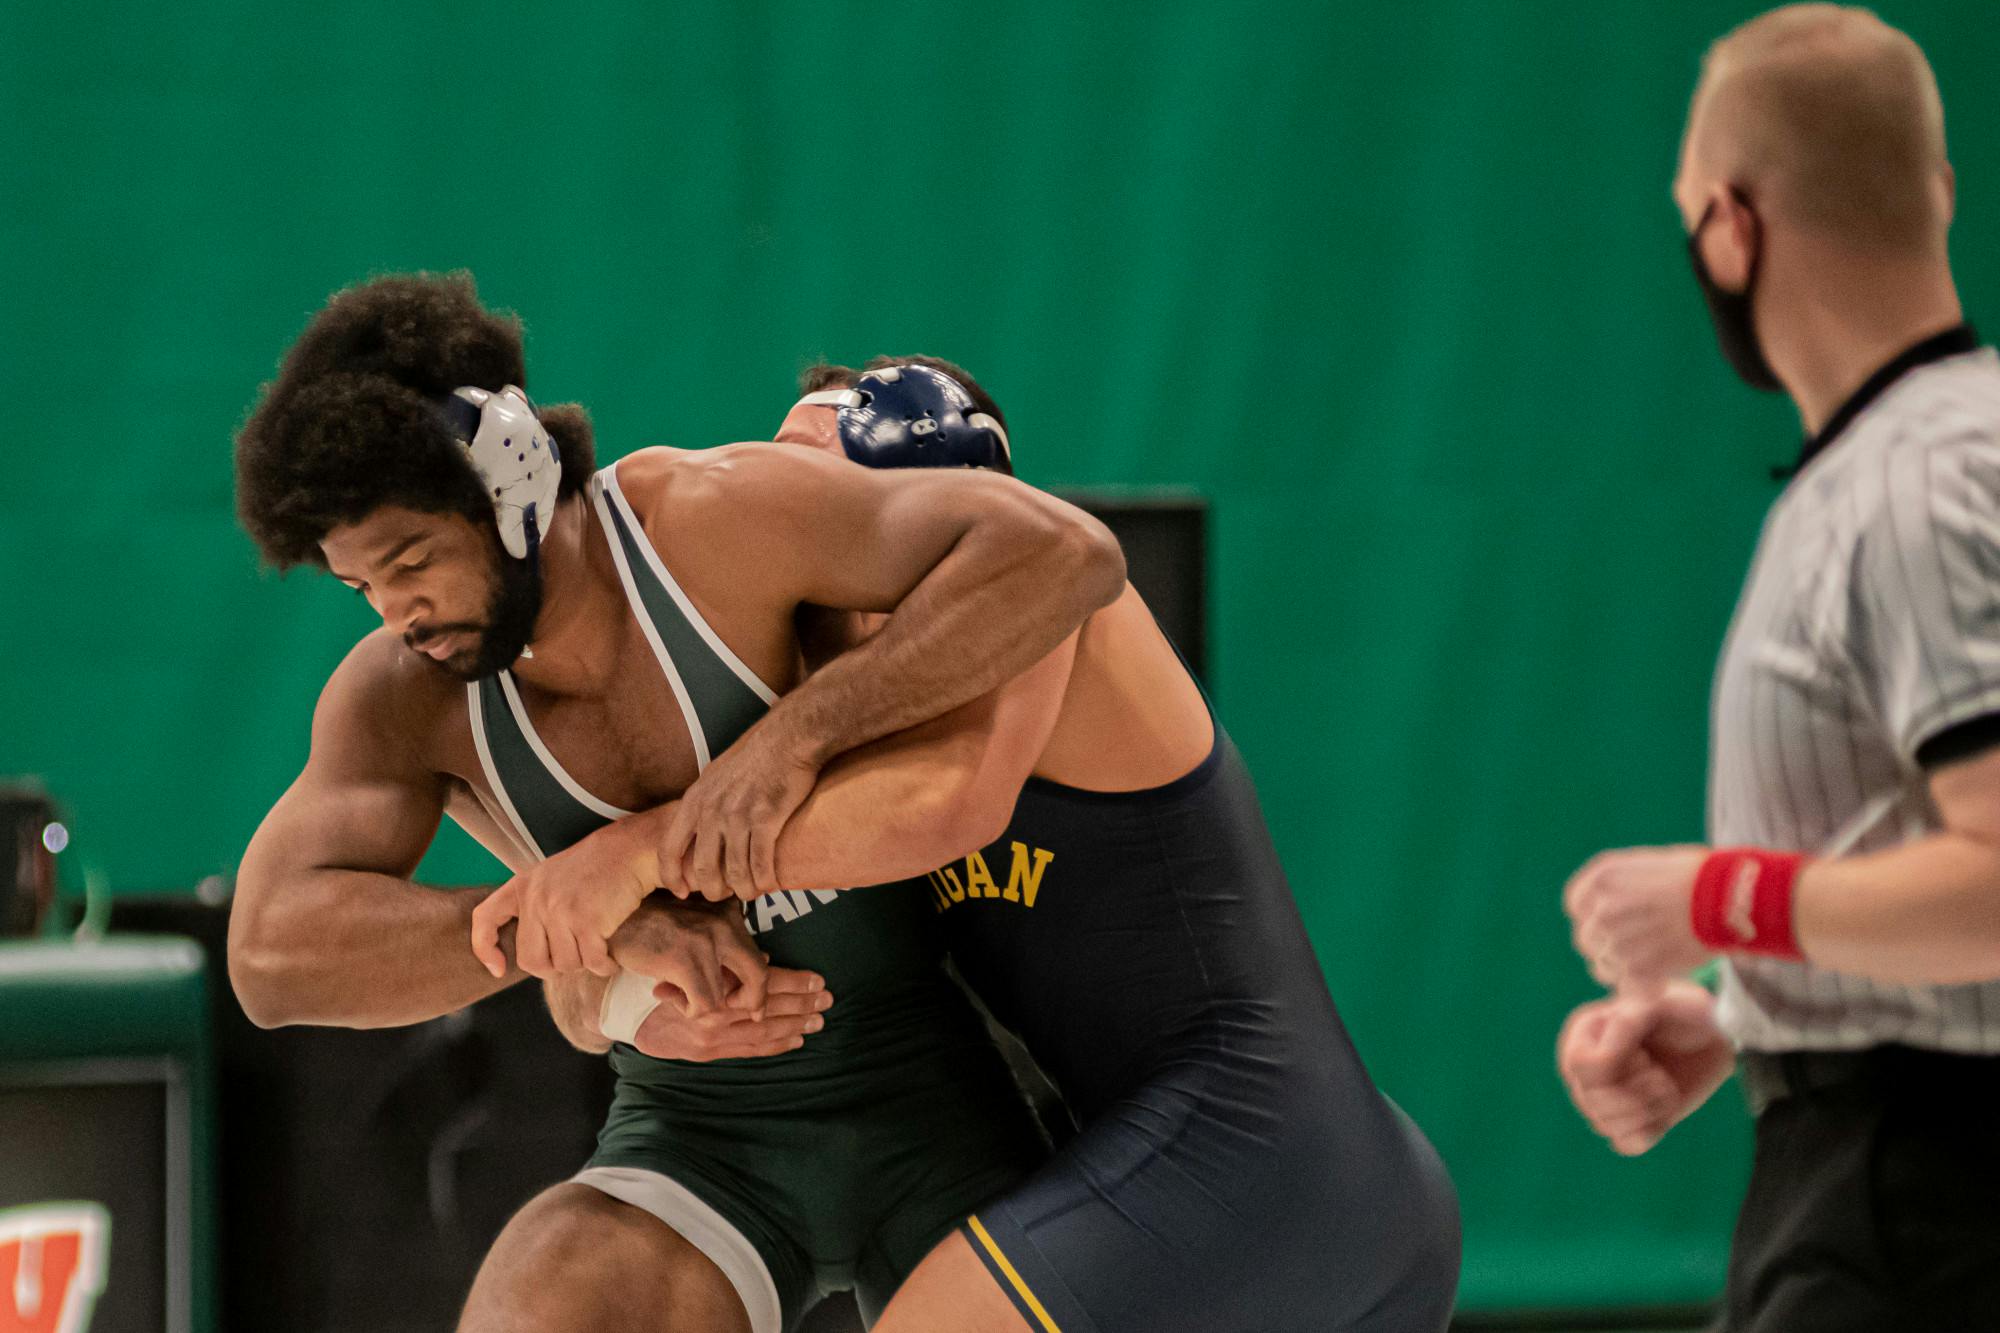 <p>Redshirt junior and No. 10 Cameron Caffey wrestles the No. 1 graduate student Myles Amine on Feb. 19. Caffey lost the match 11-6, dropping his record to 5-2.</p>